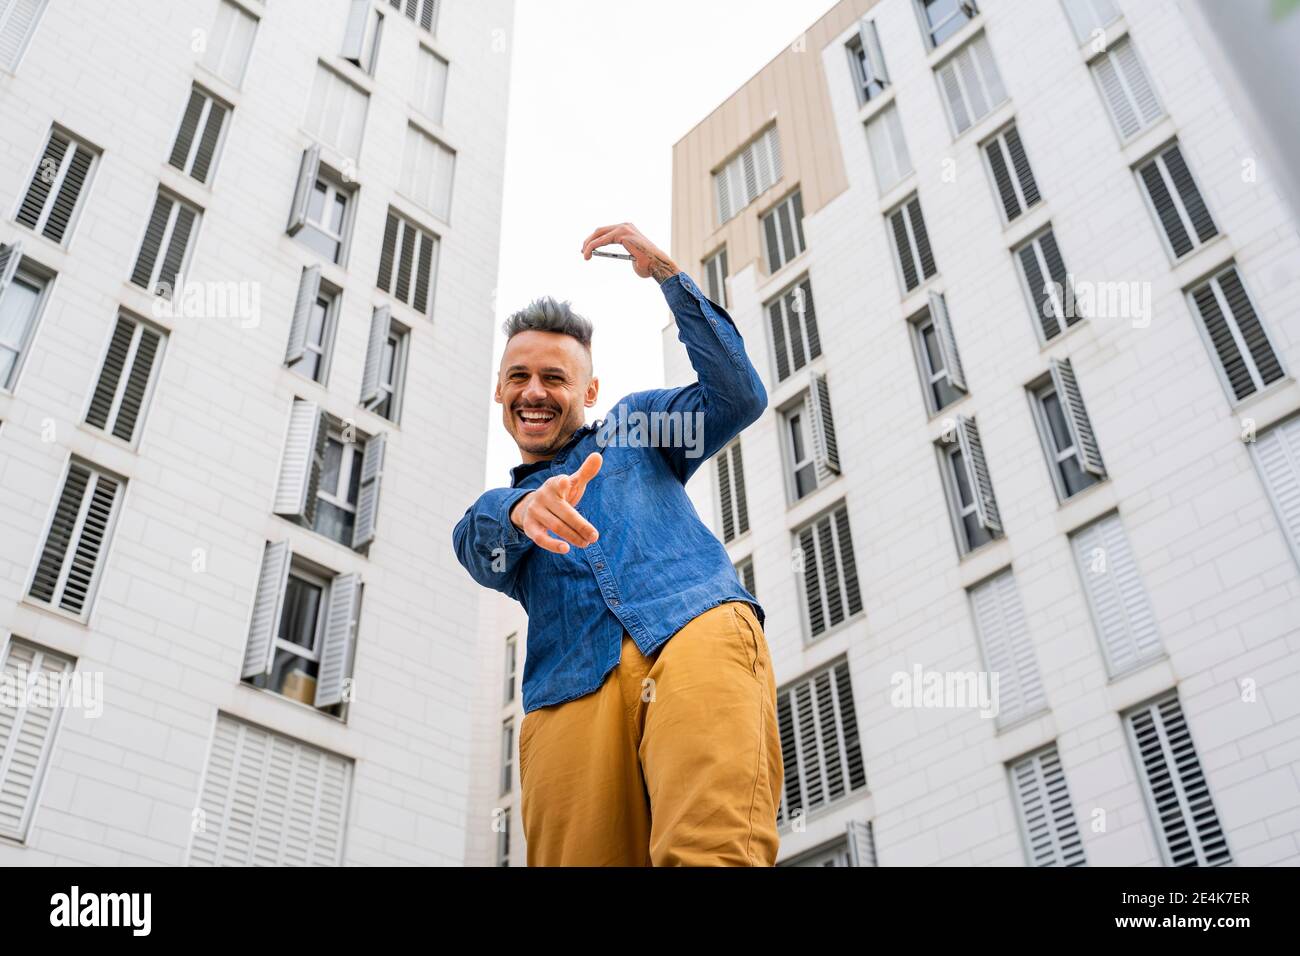 Cheerful man dancing against white buildings Stock Photo